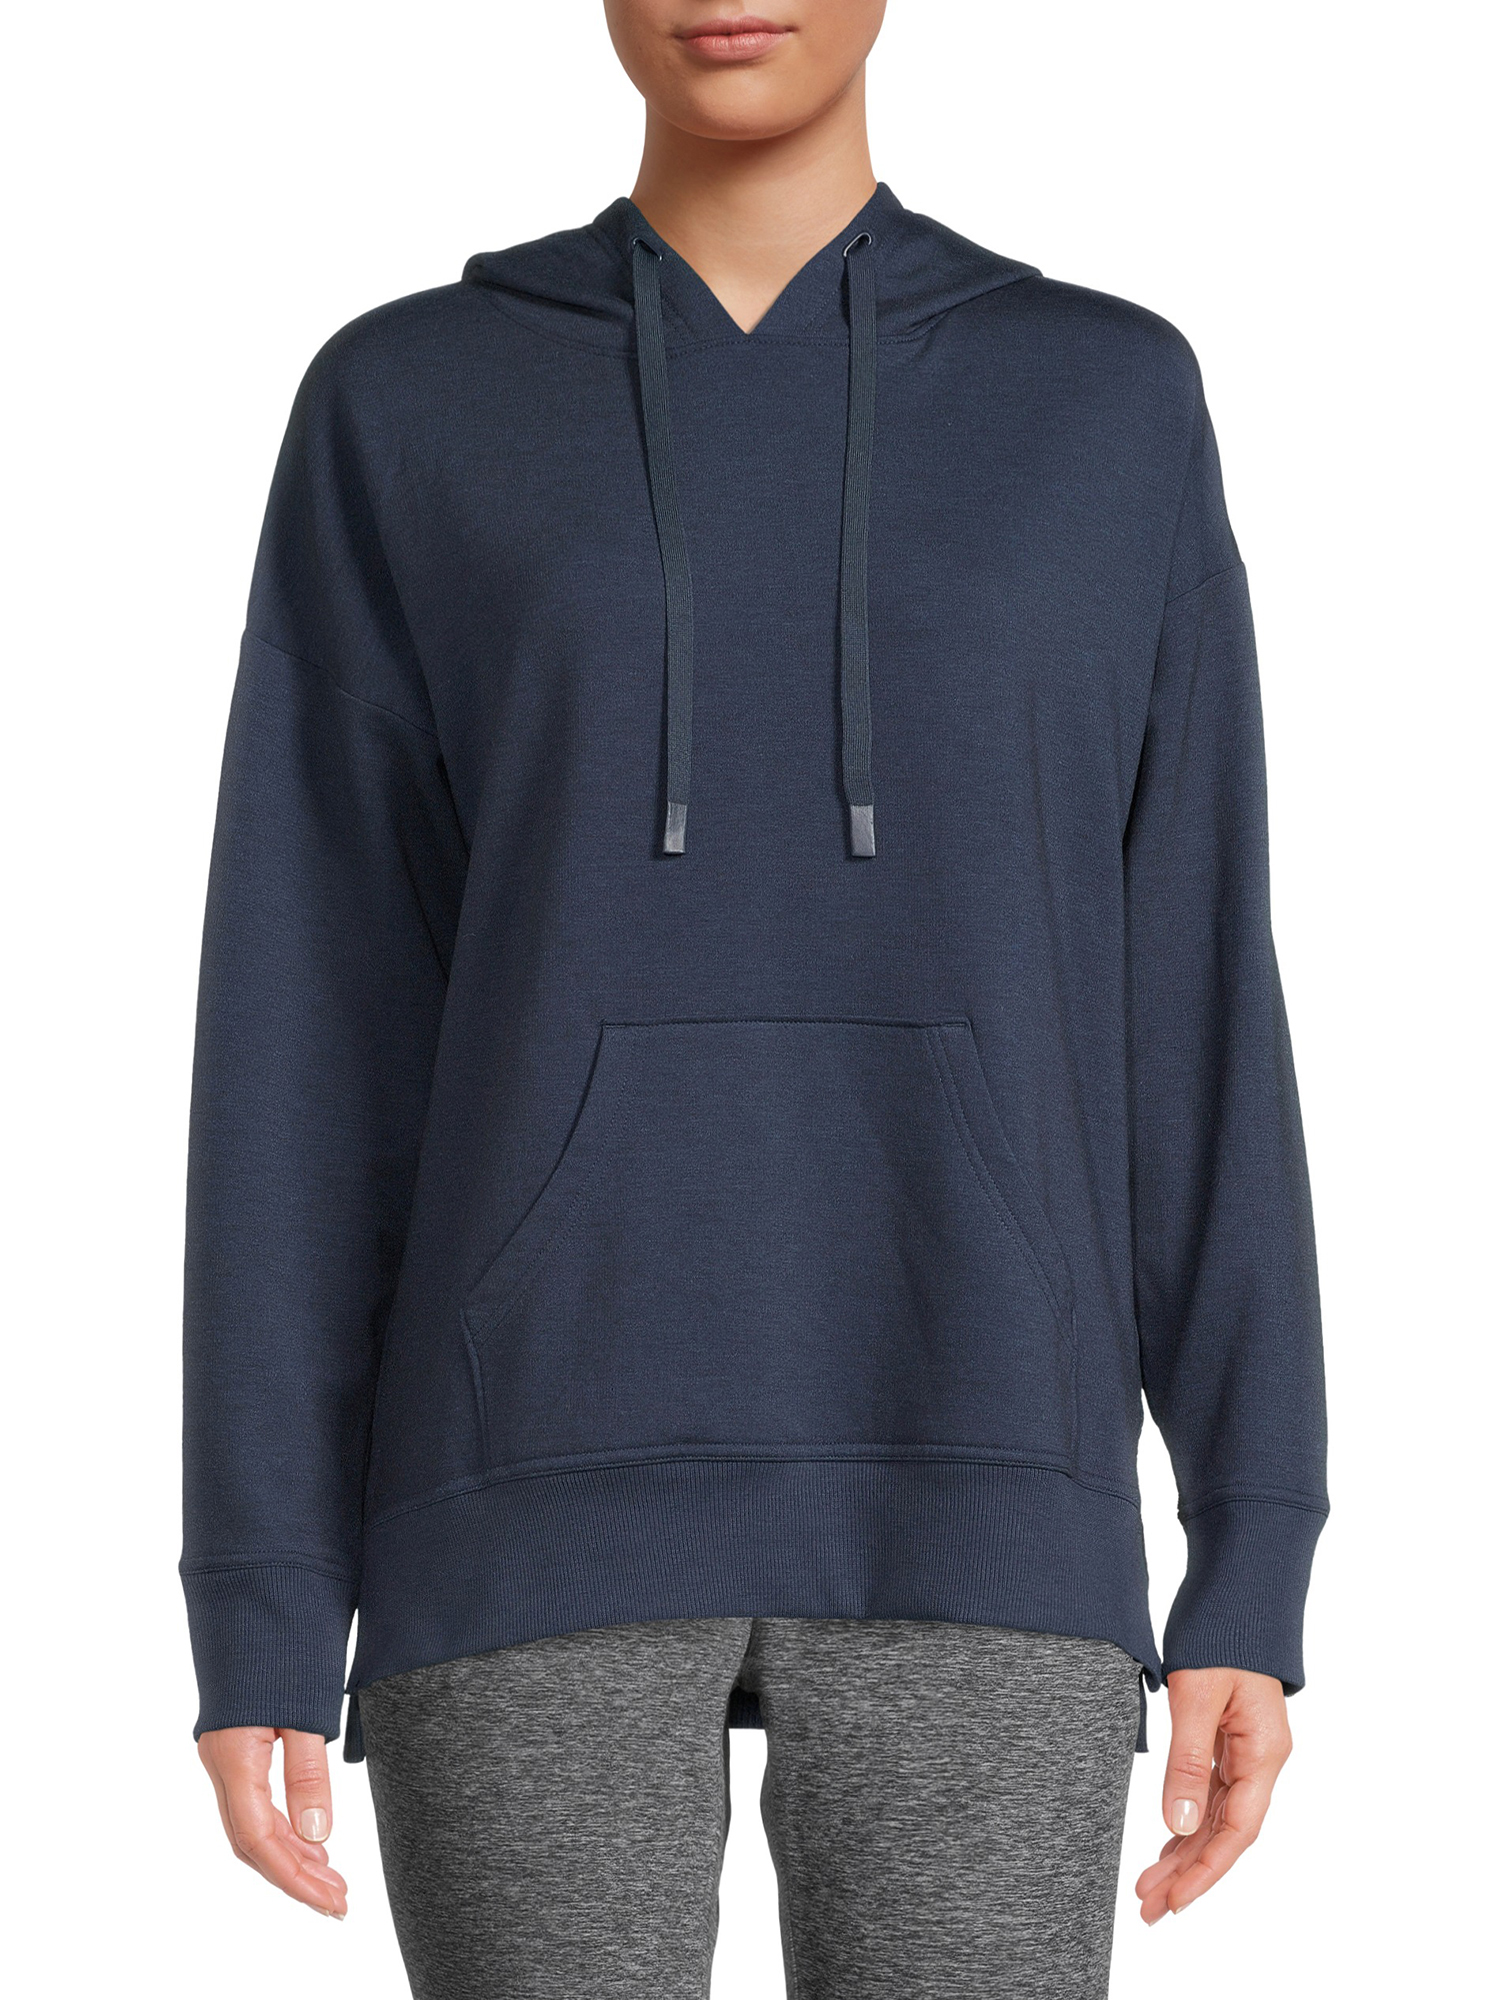 Athletic Works Women's Soft Hoodie With Front Pockets - image 1 of 5